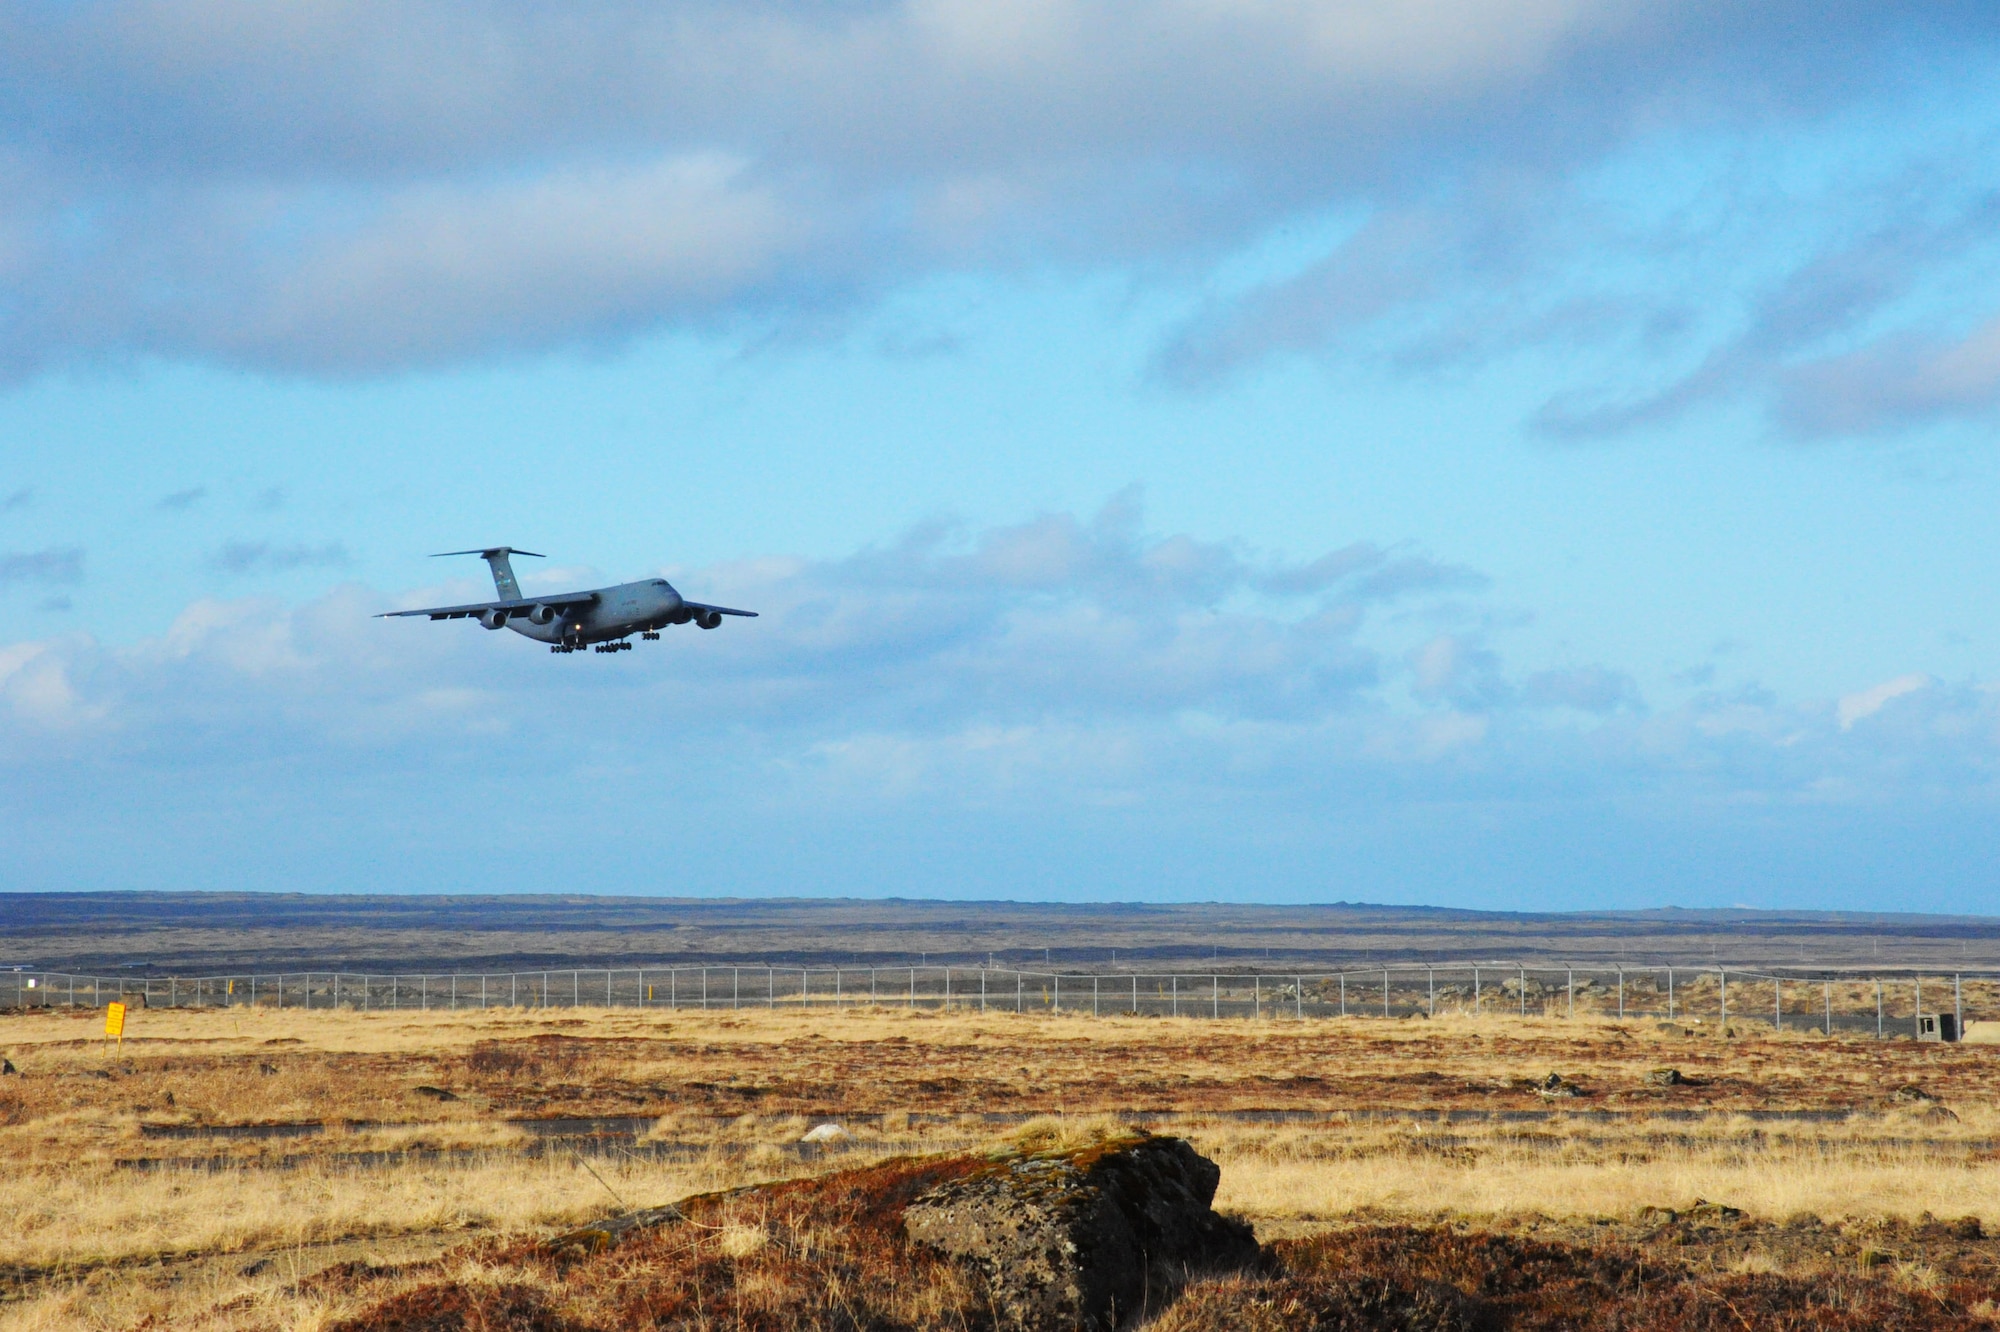 A U.S. Air Force C-5 Galaxy cargo aircraft prepares to land at Keflavik International Airport, Iceland, April 28, 2016. The U.S. Air Force’s forward presence in Europe allows the U.S. to work with allies to ensure regional security in the region. (U.S. Air Force photo by Master Sgt. Kevin Nichols/Released)

